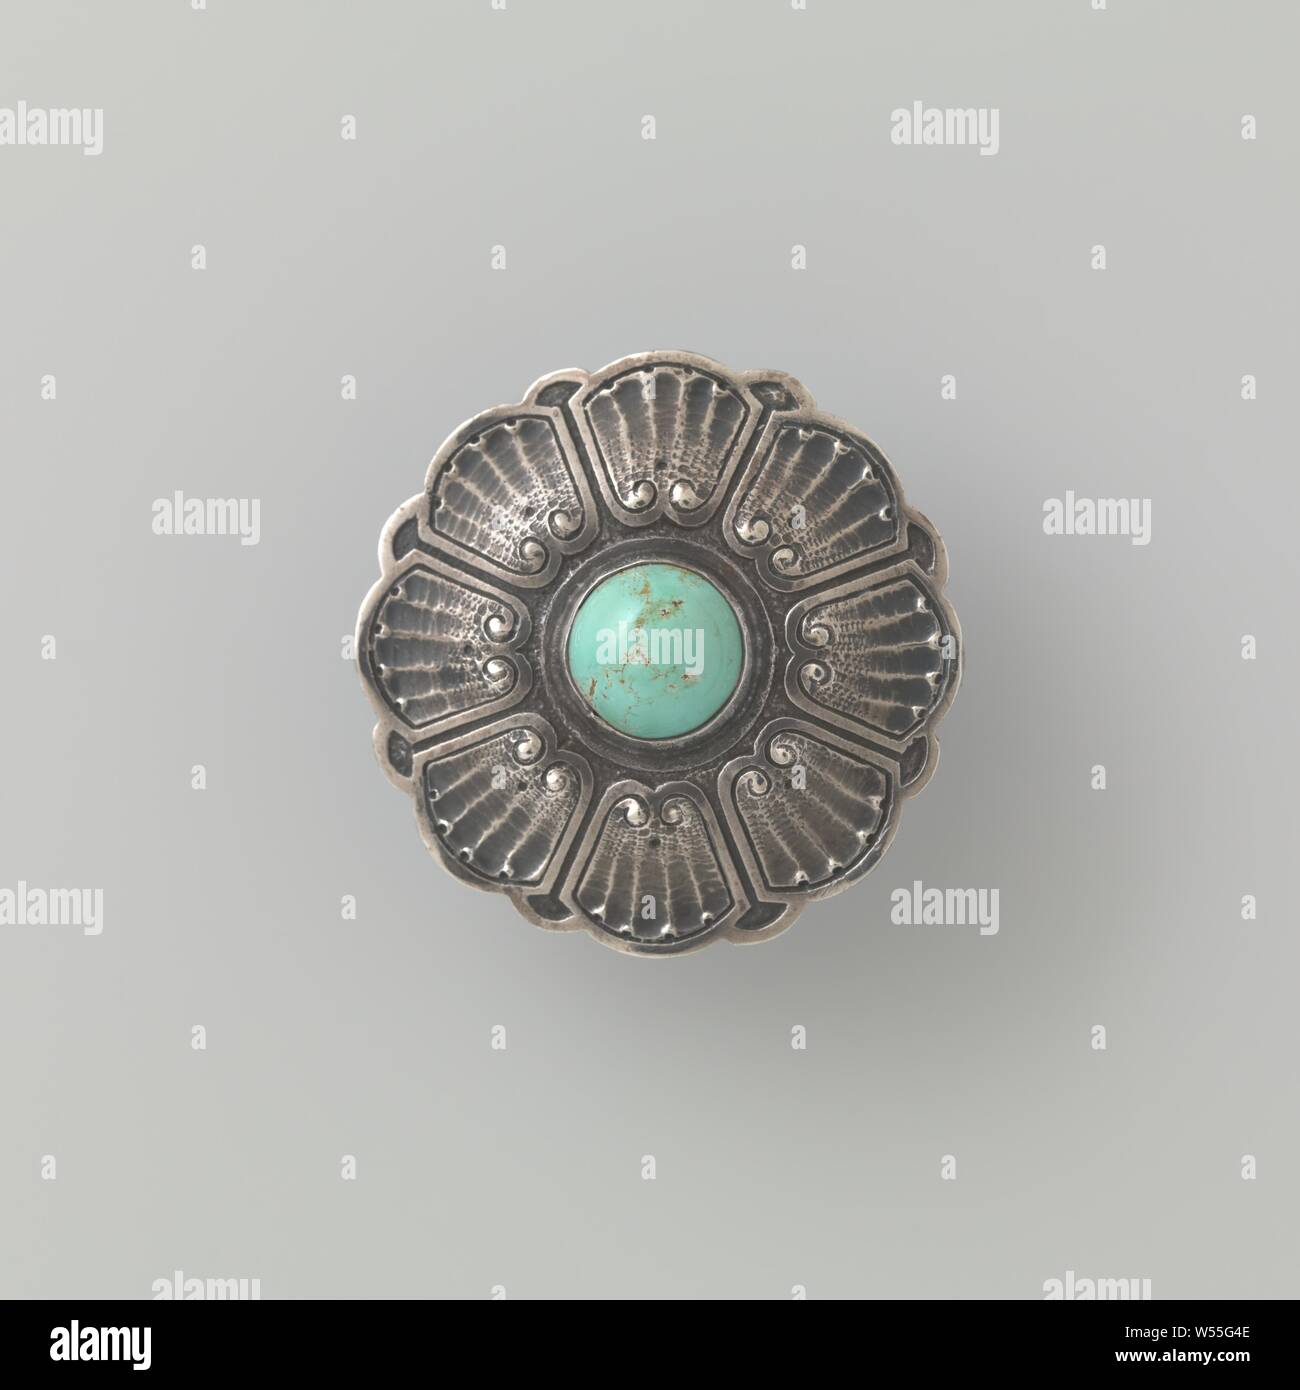 Round Brooch High Resolution Stock Photography and Images - Alamy